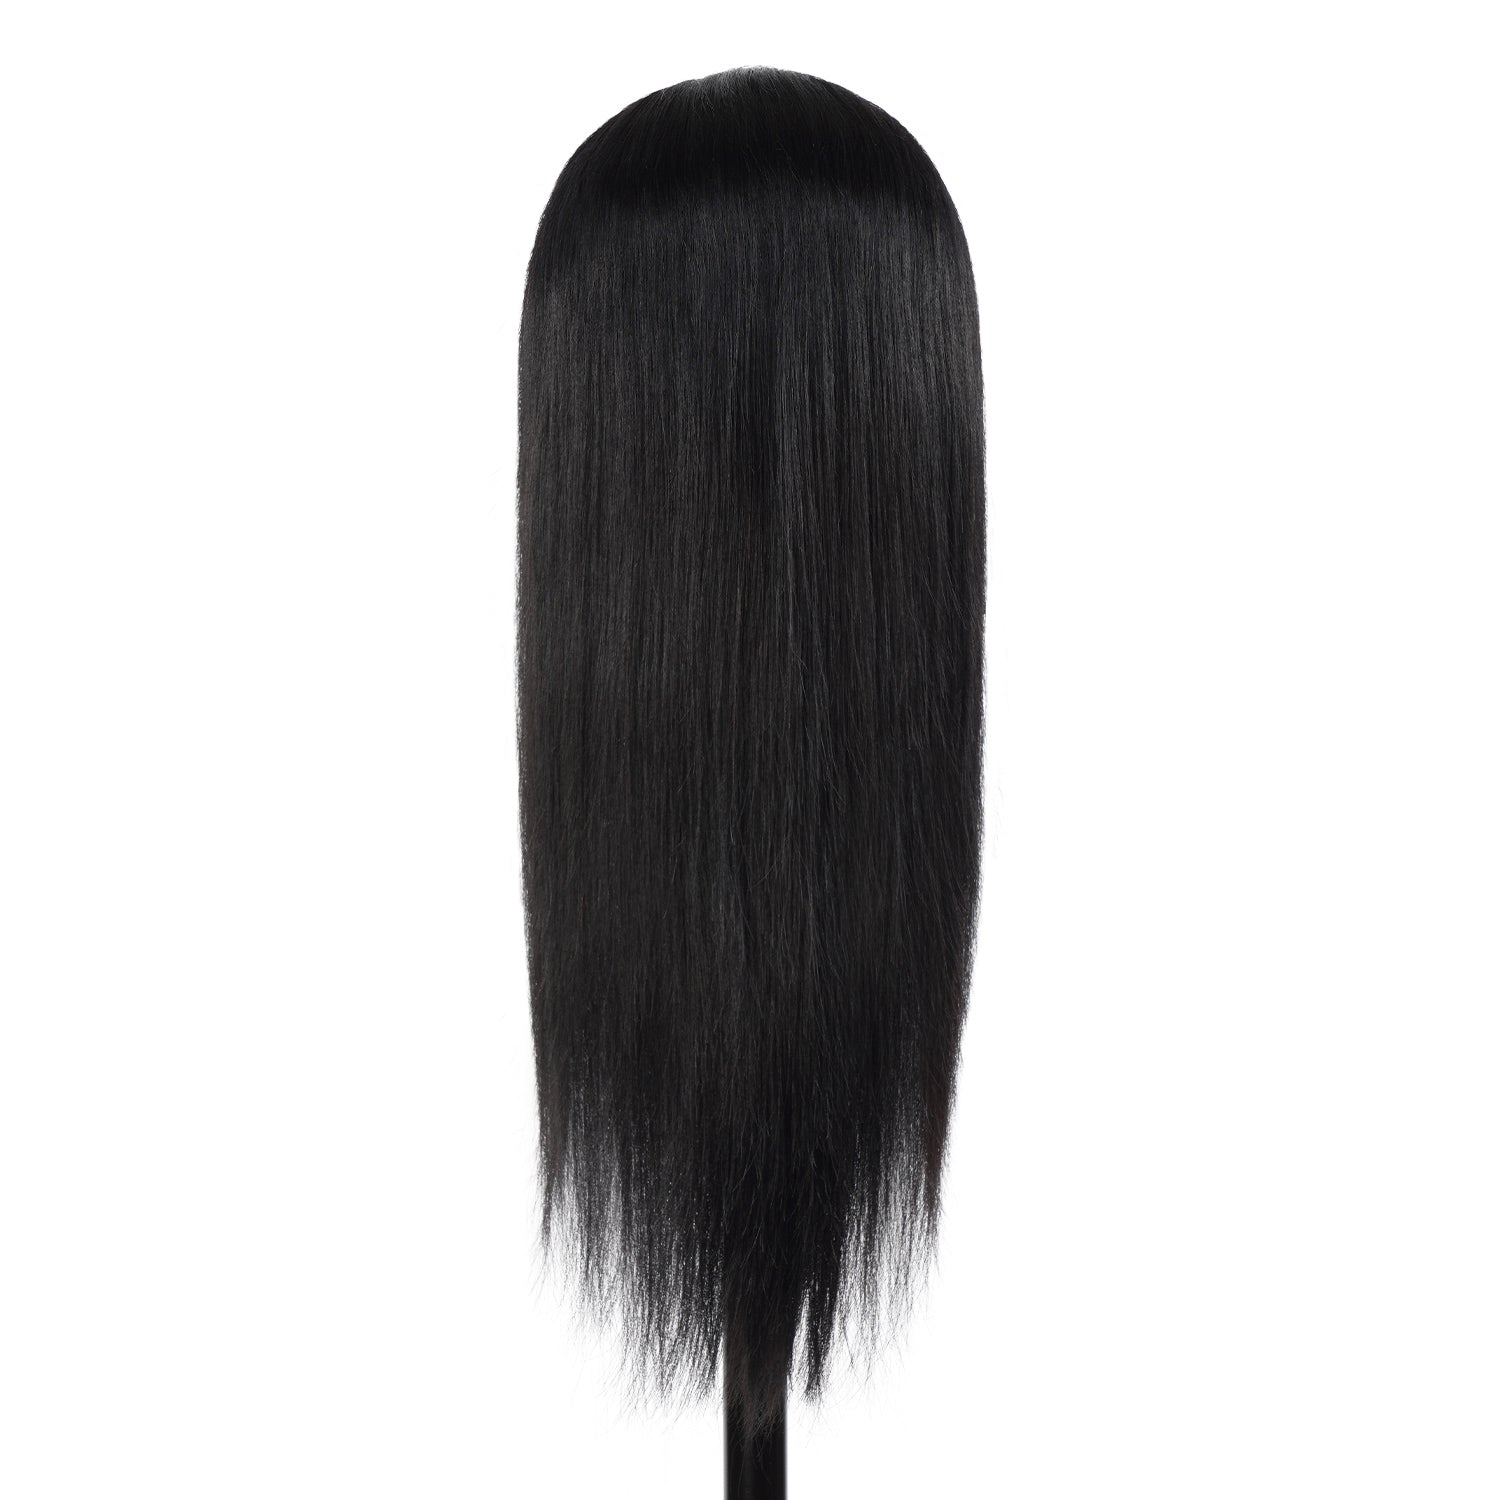 UpScale 100% Unprocessed Brazilian Virgin Remy Human Hair Full Lace Wig Straight